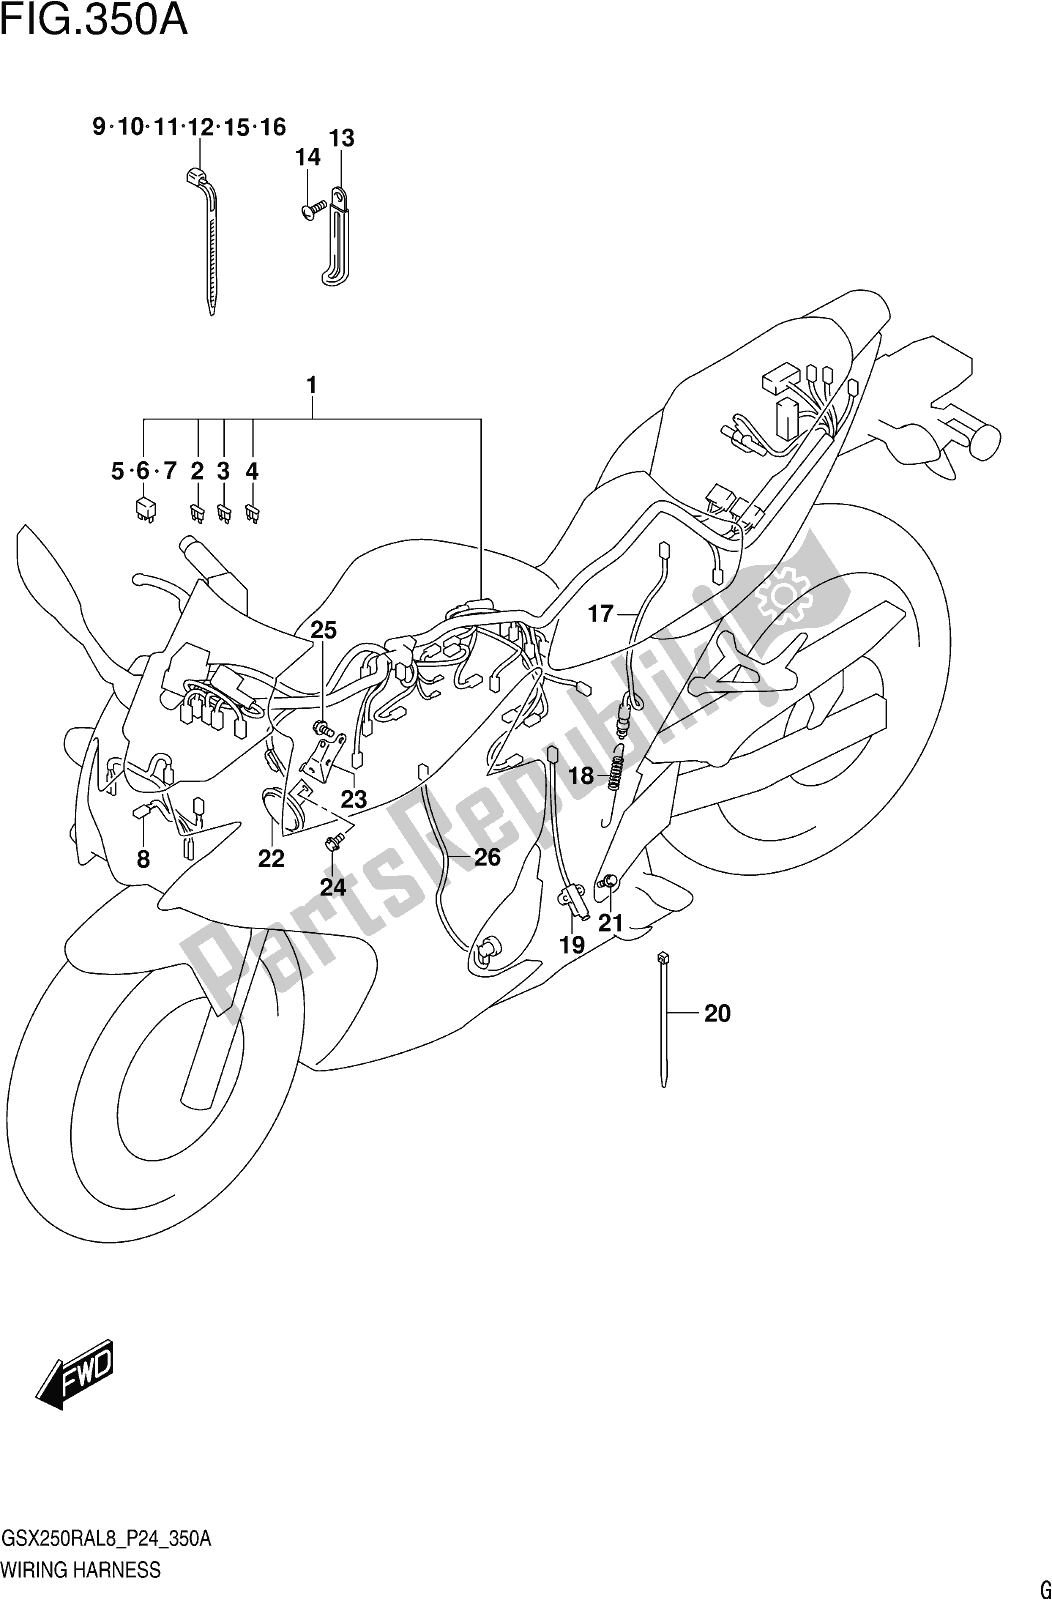 All parts for the Fig. 350a Wiring Harness of the Suzuki GW 250 RAZ 2018